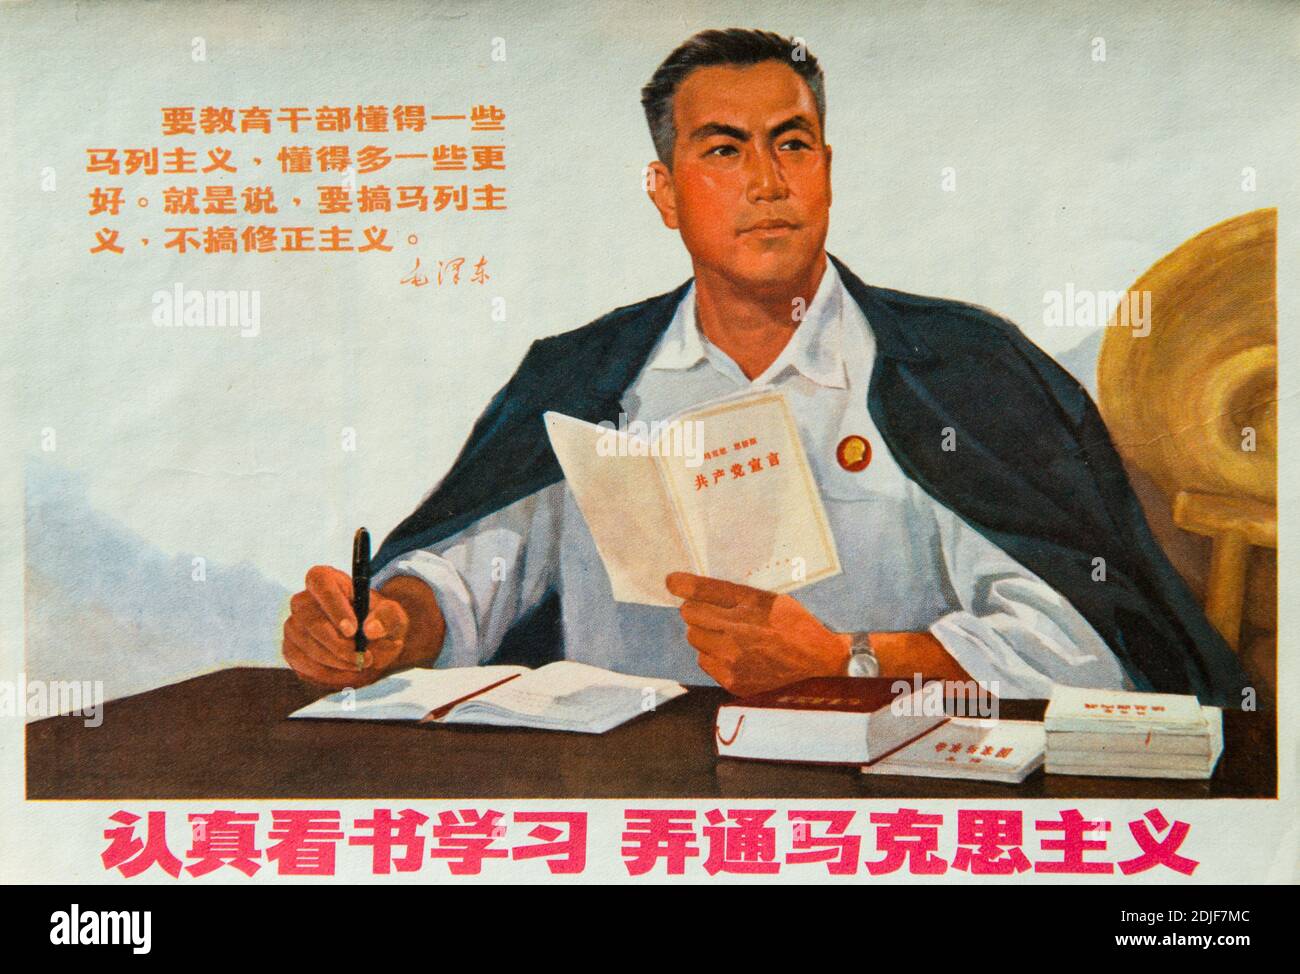 A genuine propaganda poster during the Cultural Revolution in China. The Chinese characters read: Read and study carefully to understand Marxism. Stock Photo